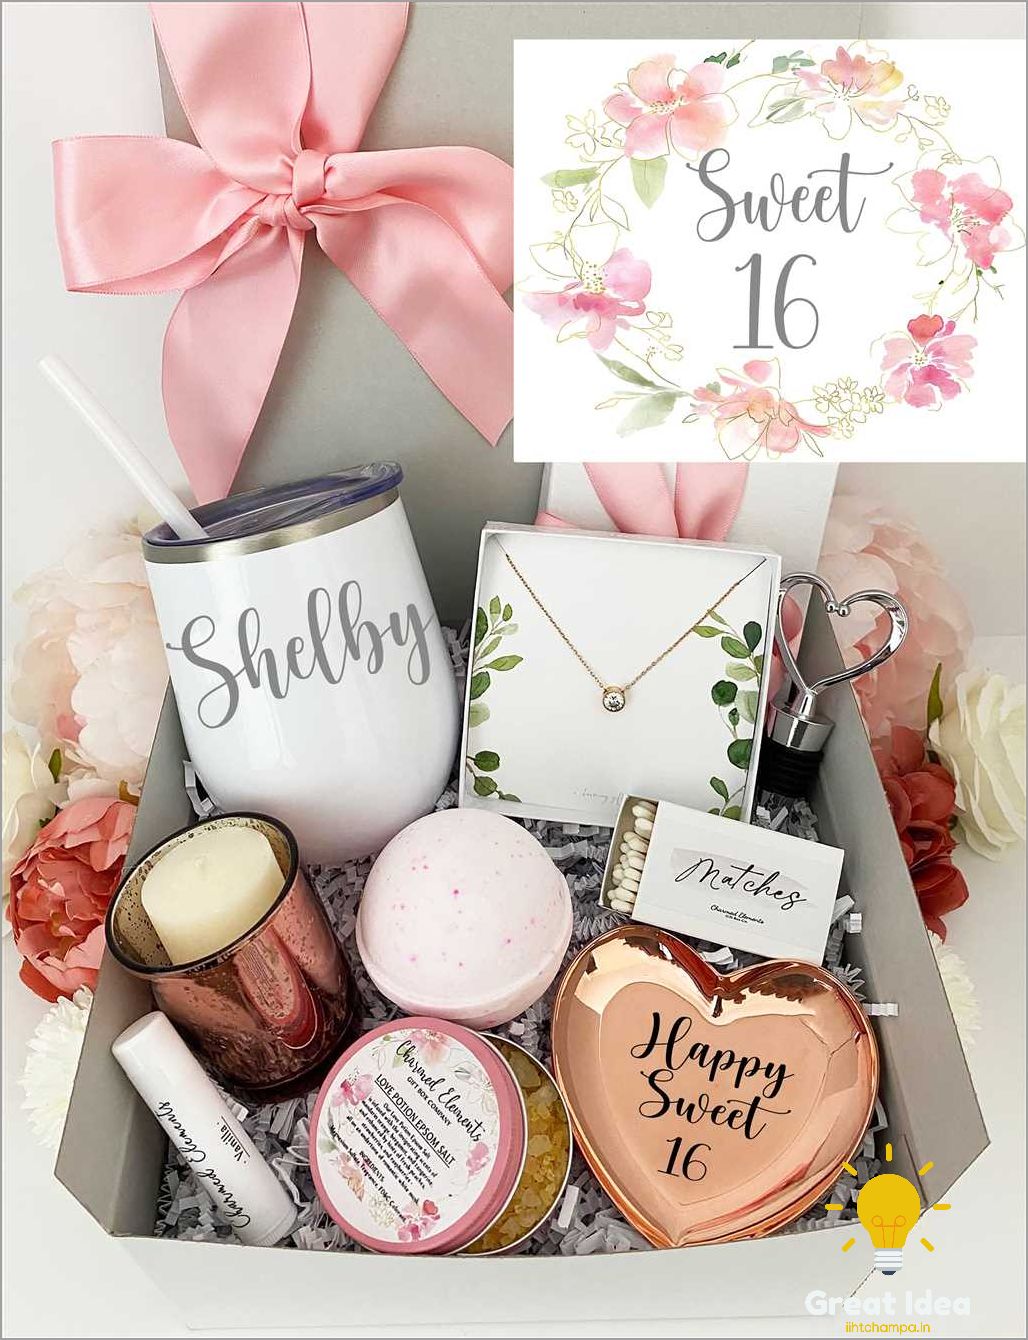 Looking for a unique gift idea for your sweet 16 best friend?